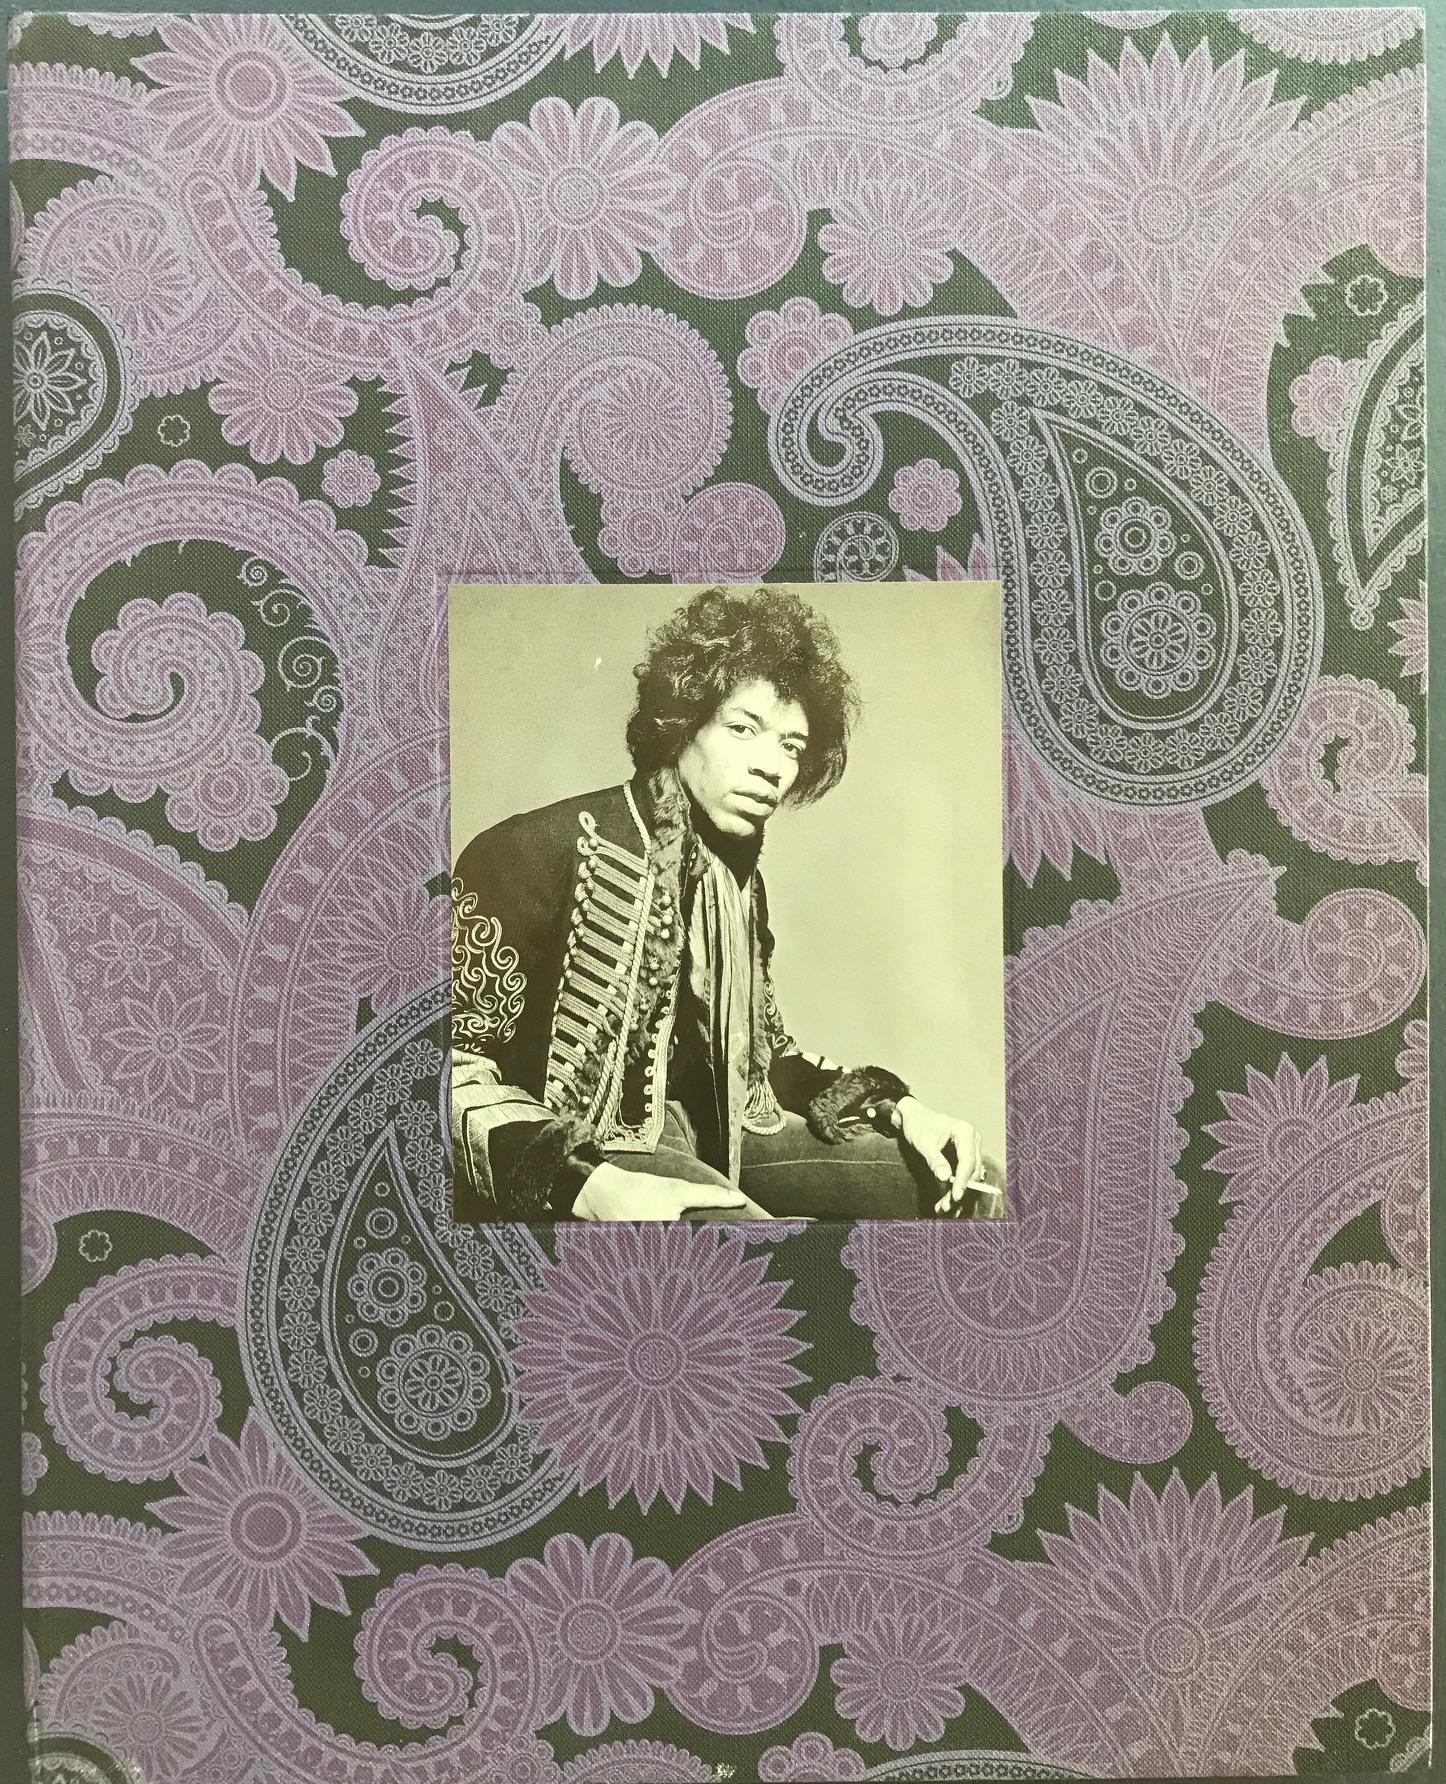 Jimi Hendrix book - Contemporary Photograph by Gered Mankowitz